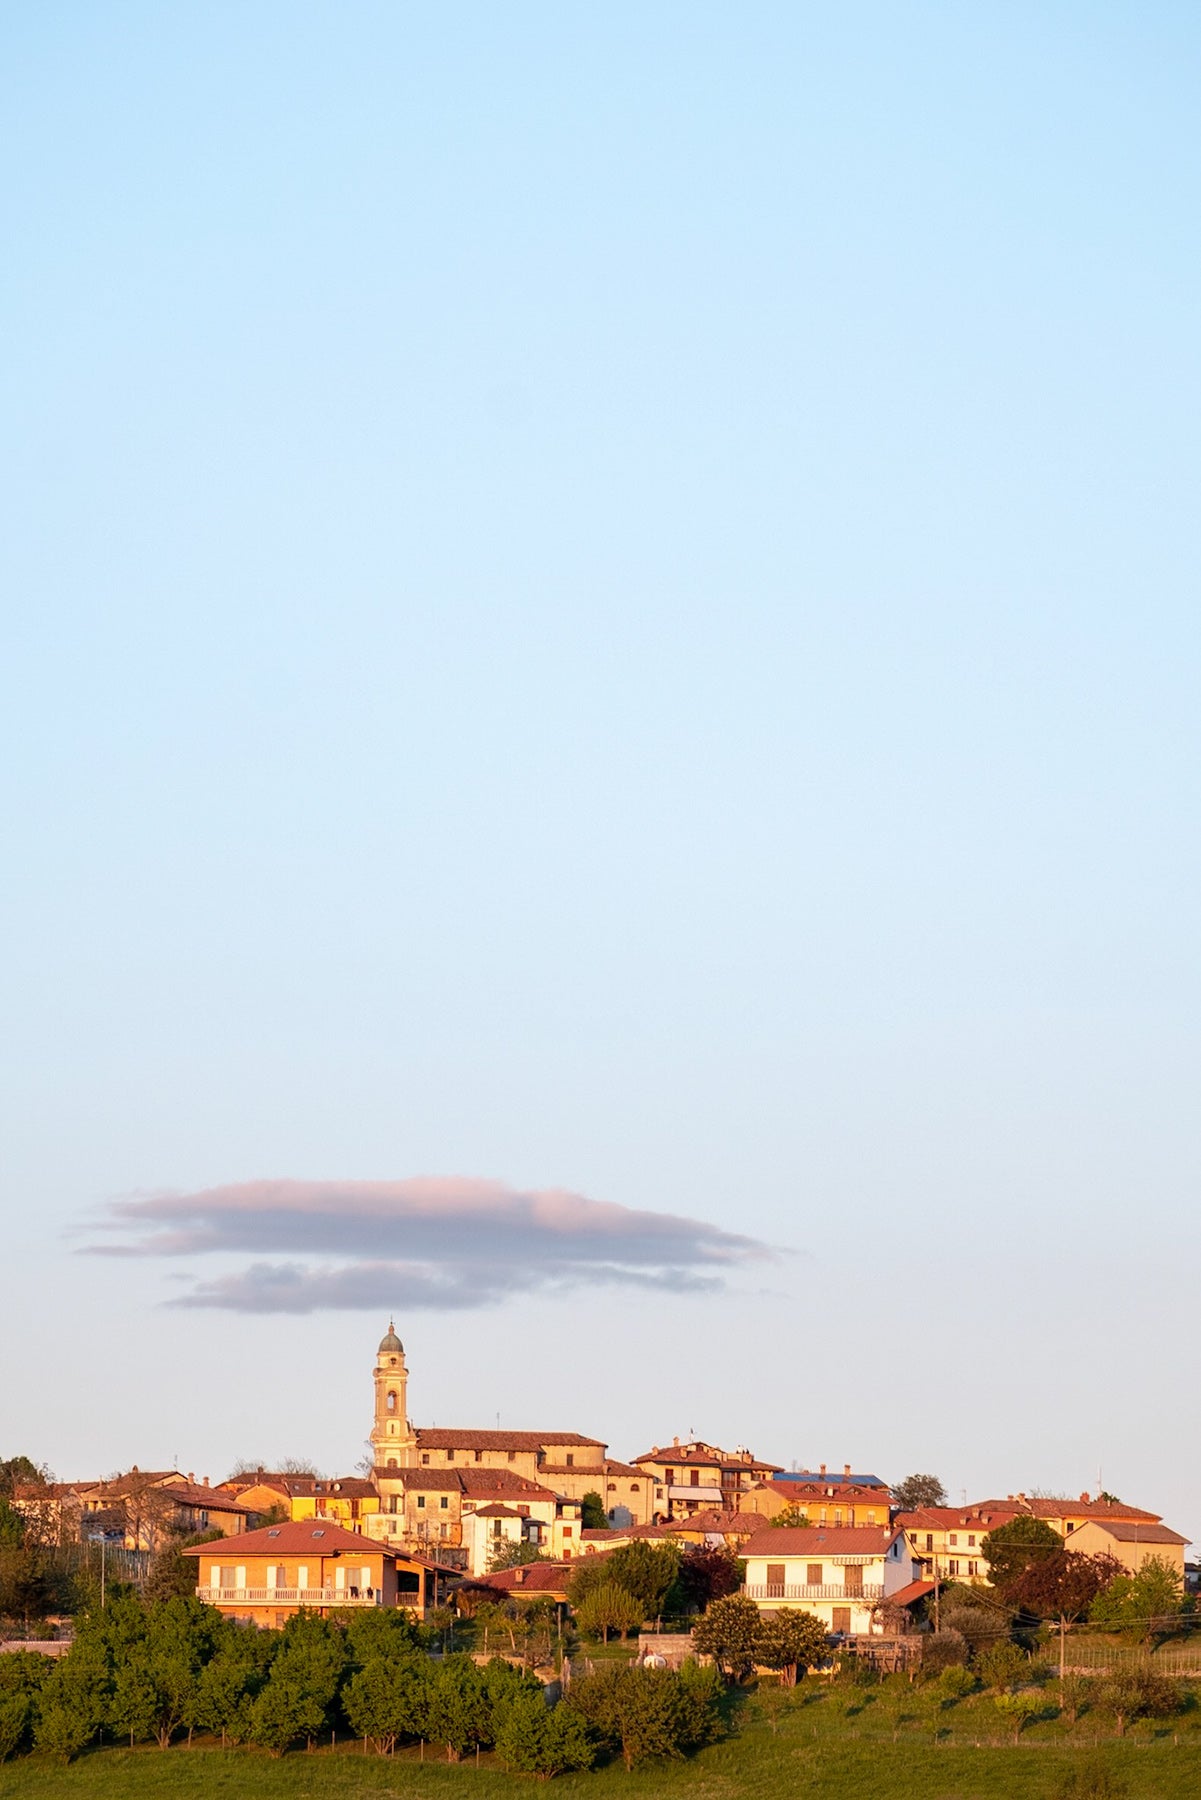 The hill top town of Roddino in Piedmont, early one evening in April. The sun shining on   the town with a light cloud formation and clear blue sky above.